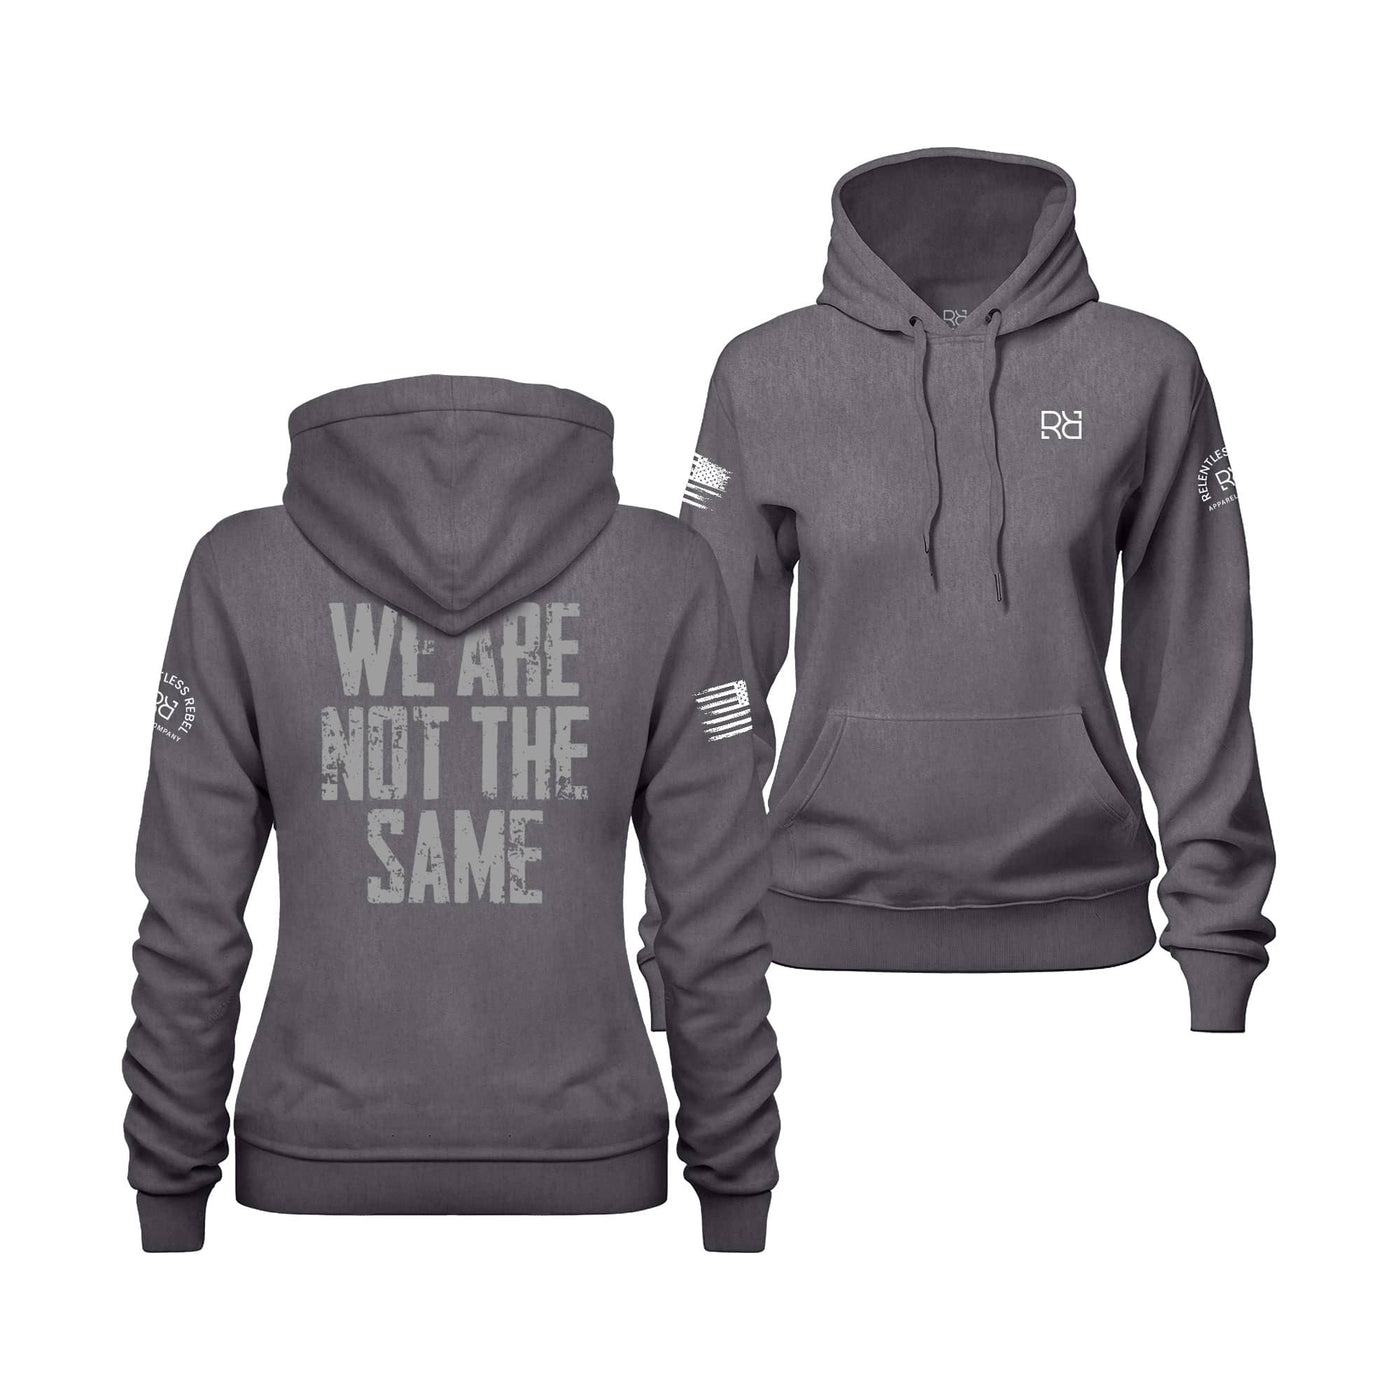 We Are Not the Same | Women's Hoodie